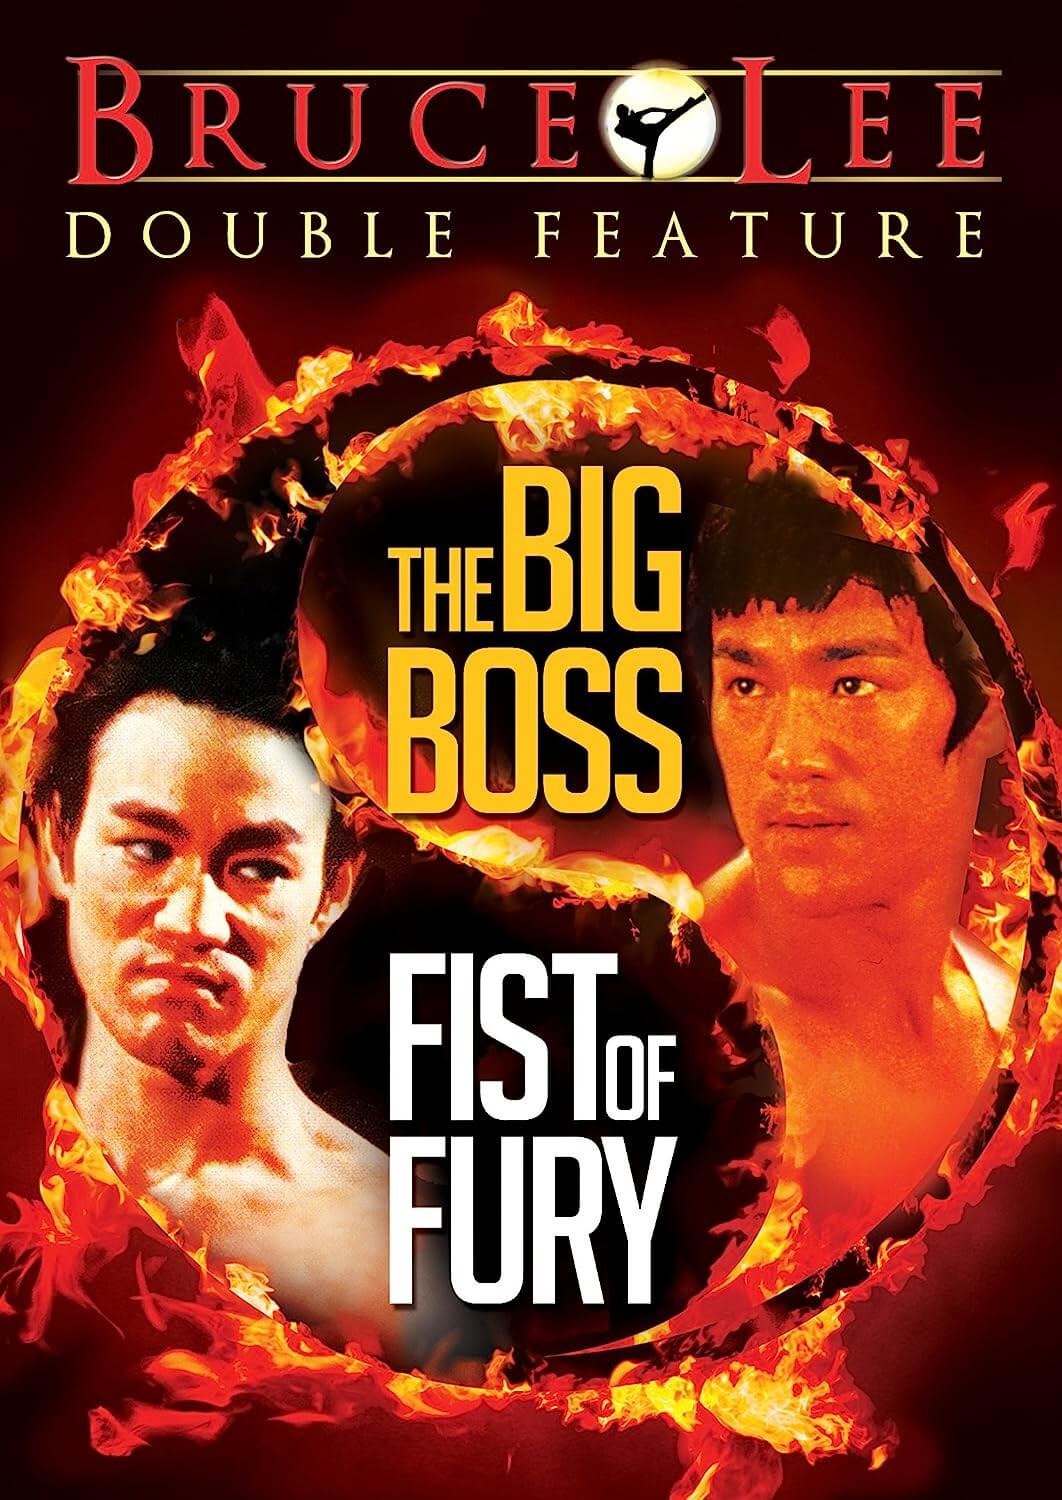 "The Big Boss" and "Fist of Fury" double feature